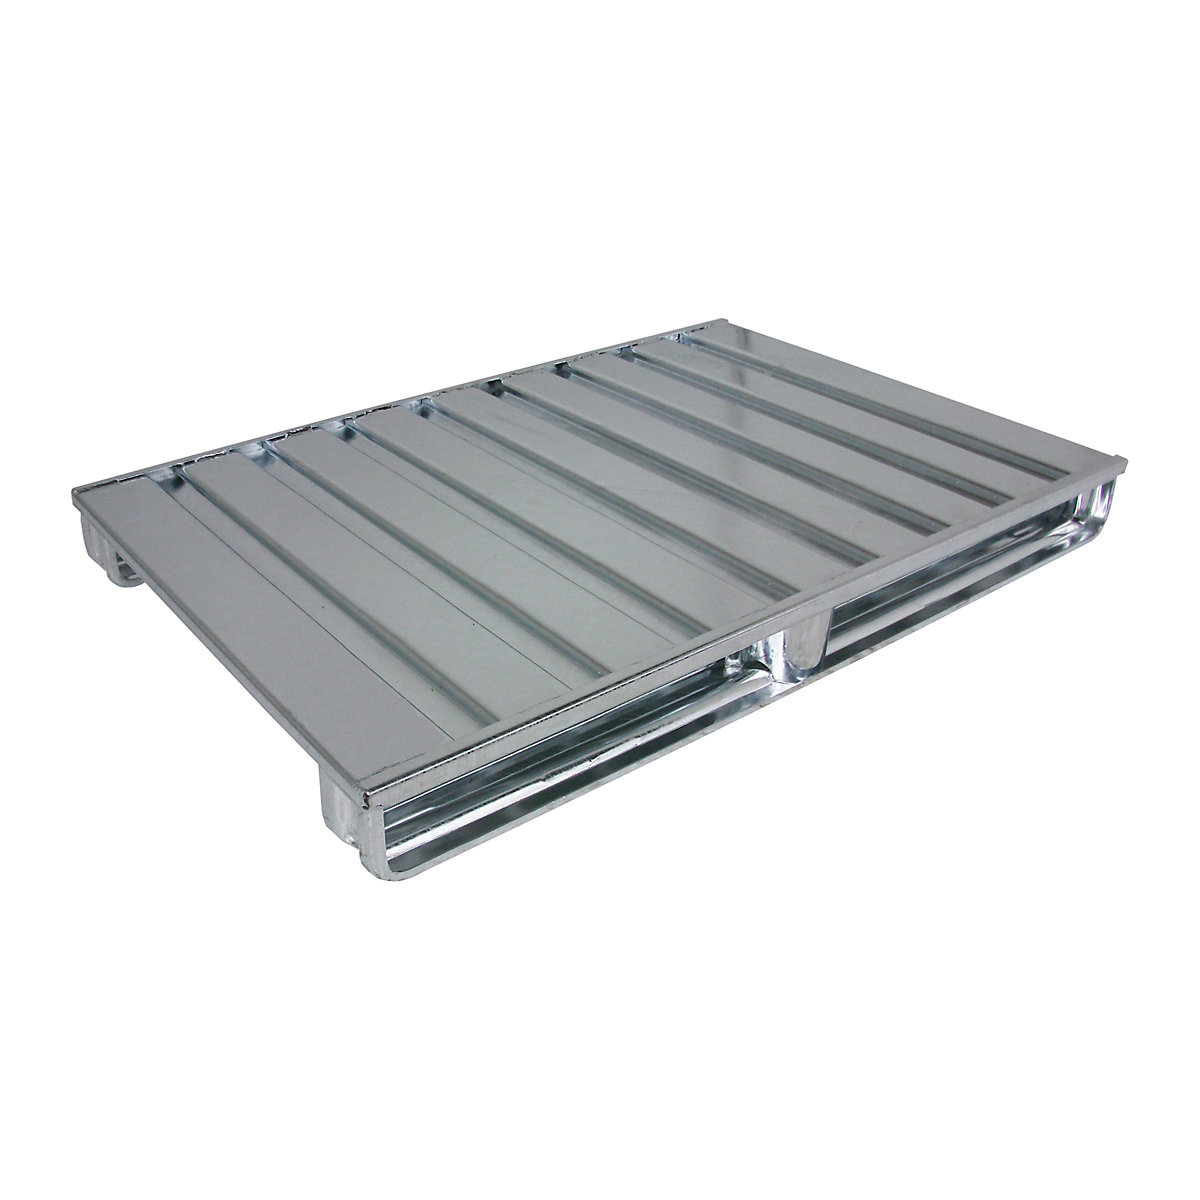 Flat steel pallet – Heson, LxW 1000 x 800 mm, max. load 2000 kg, zinc plated-2